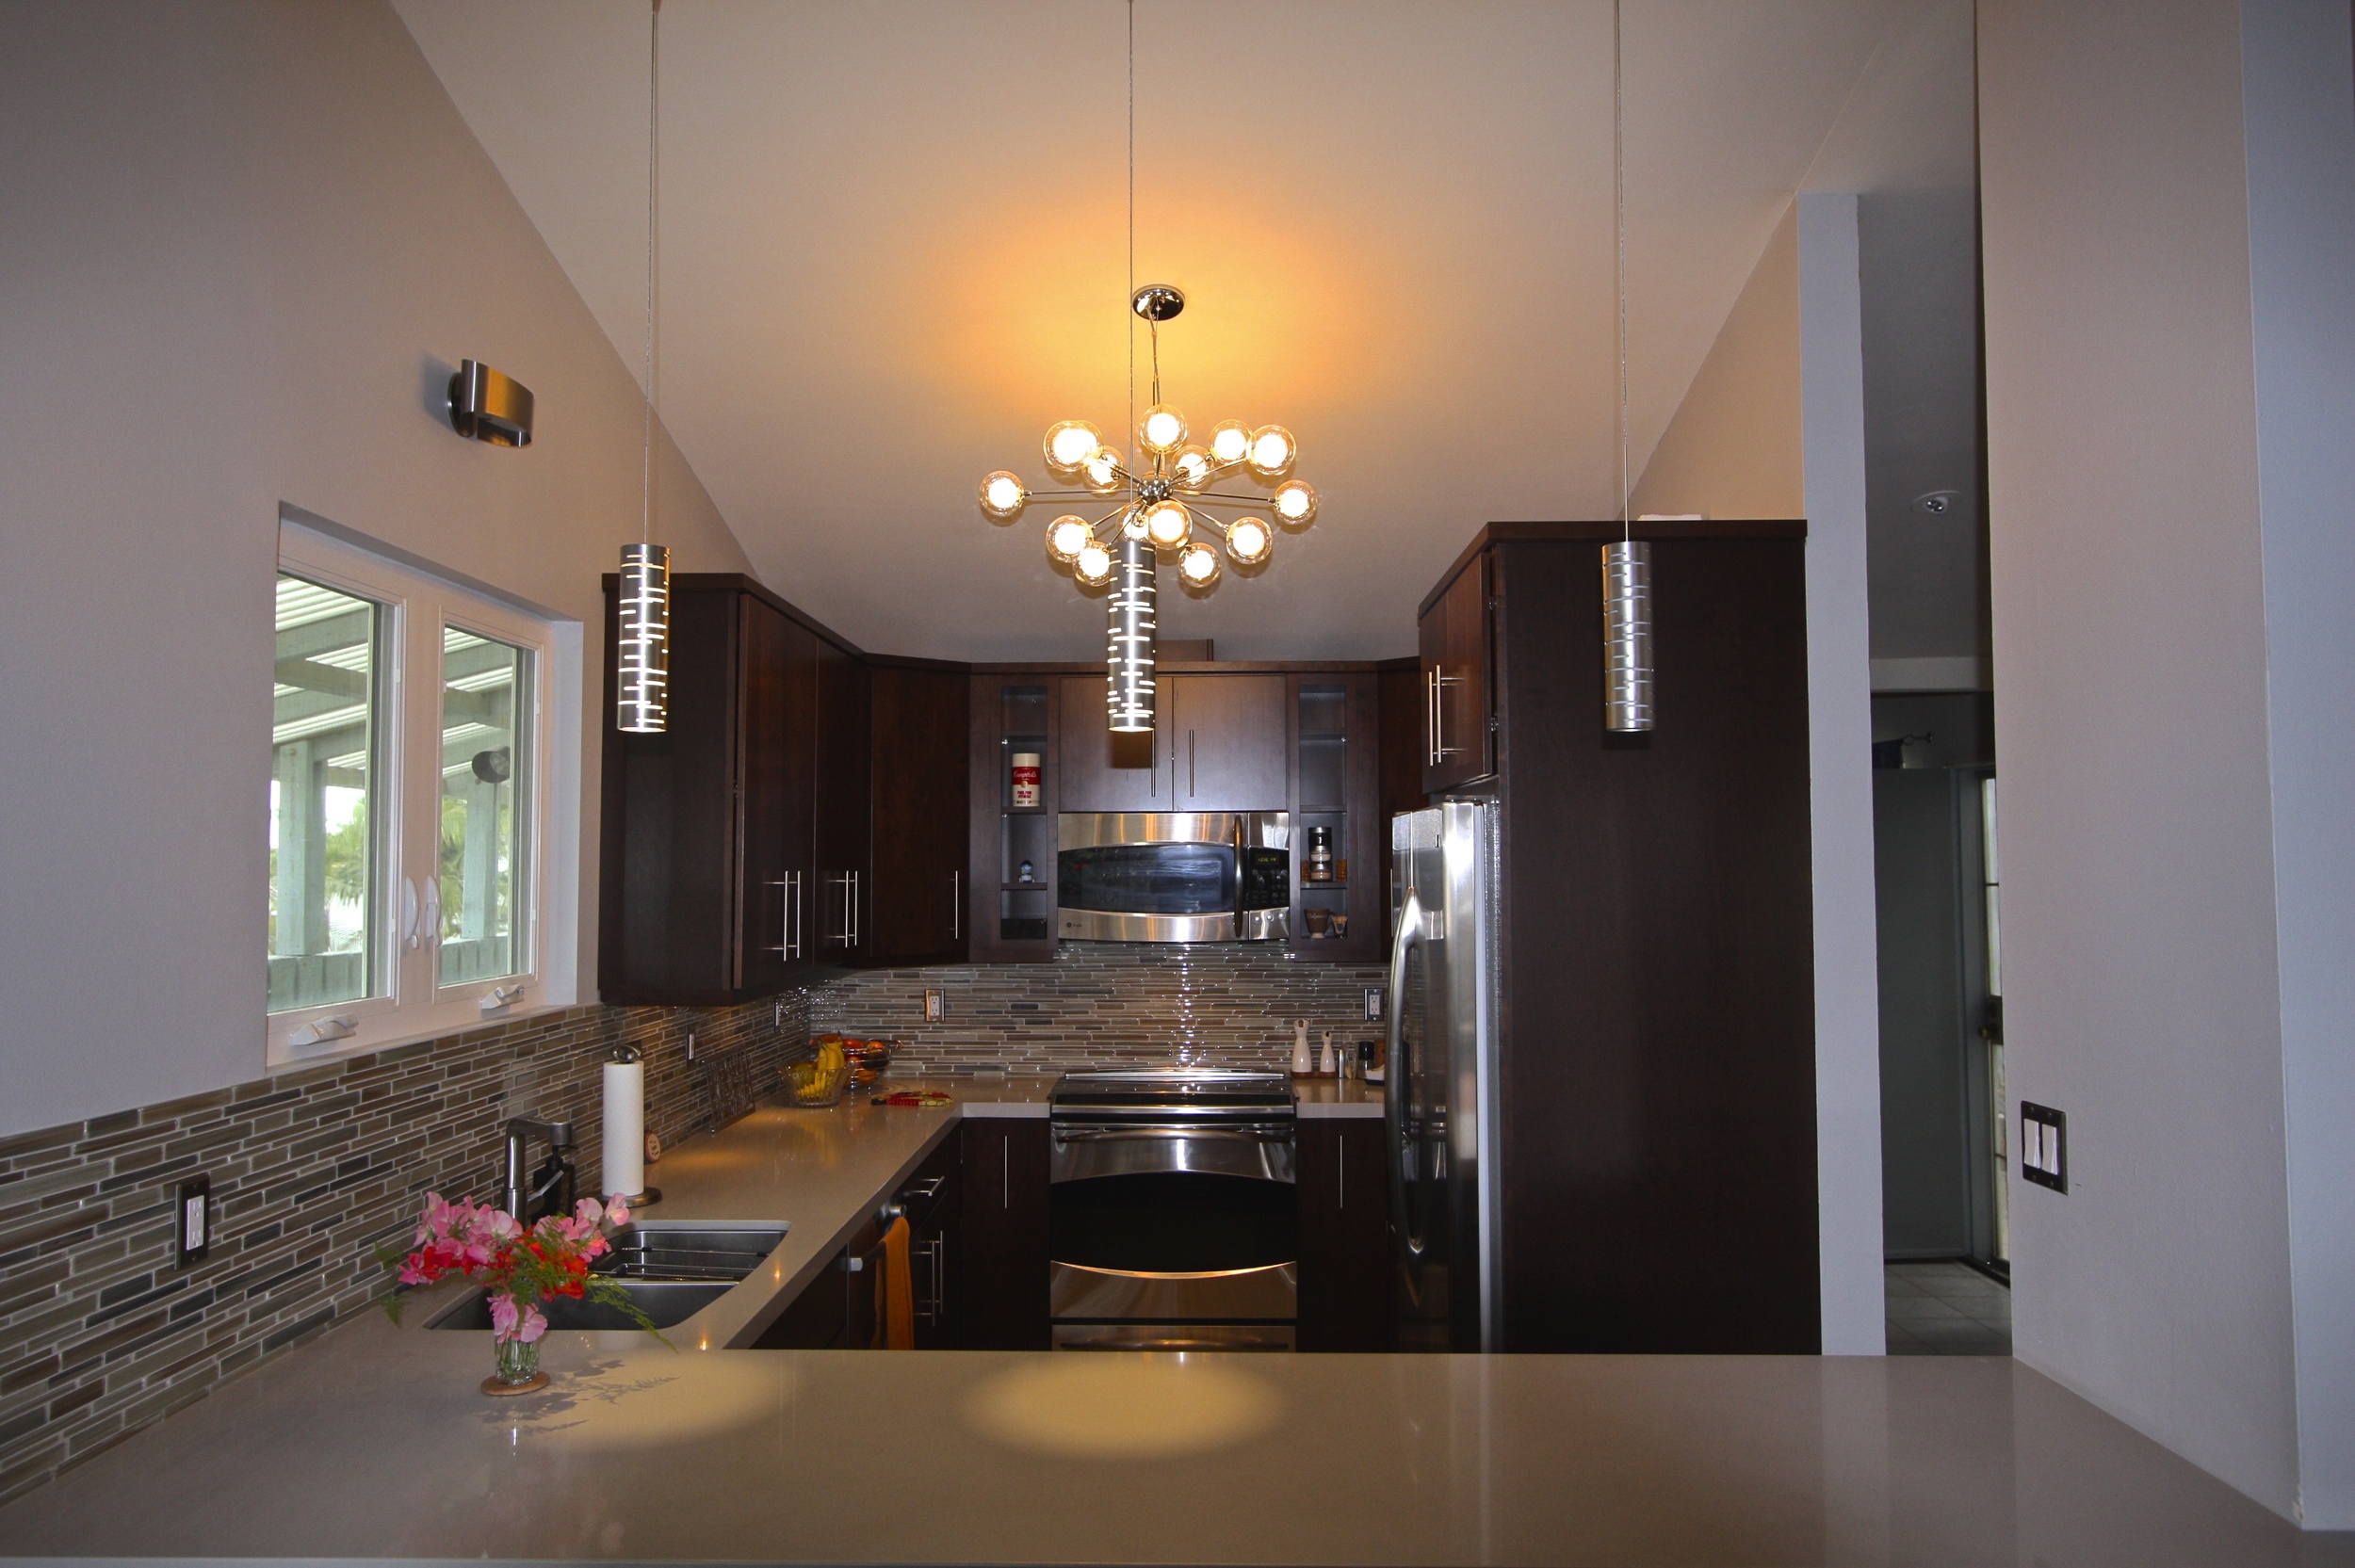  After: Beautiful countertop, backsplash tile and really great modern lighting. 